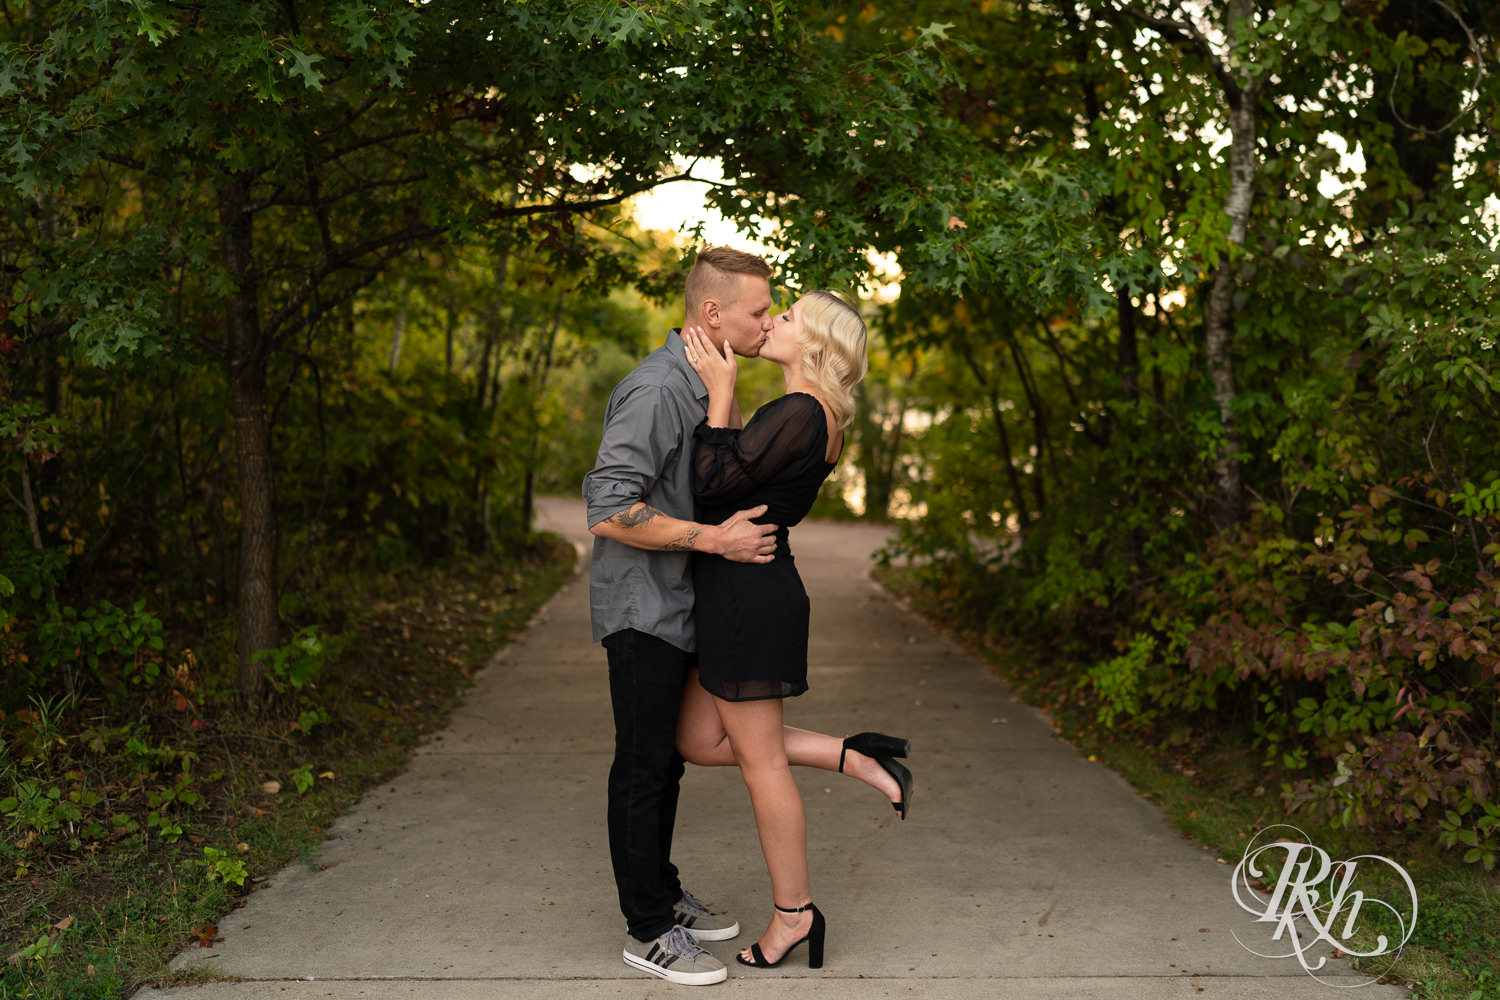 Blond woman in black dress and man in dress shirt kiss during sunset engagement photos at Lebanon Hills Regional Park in Eagan, Minnesota.